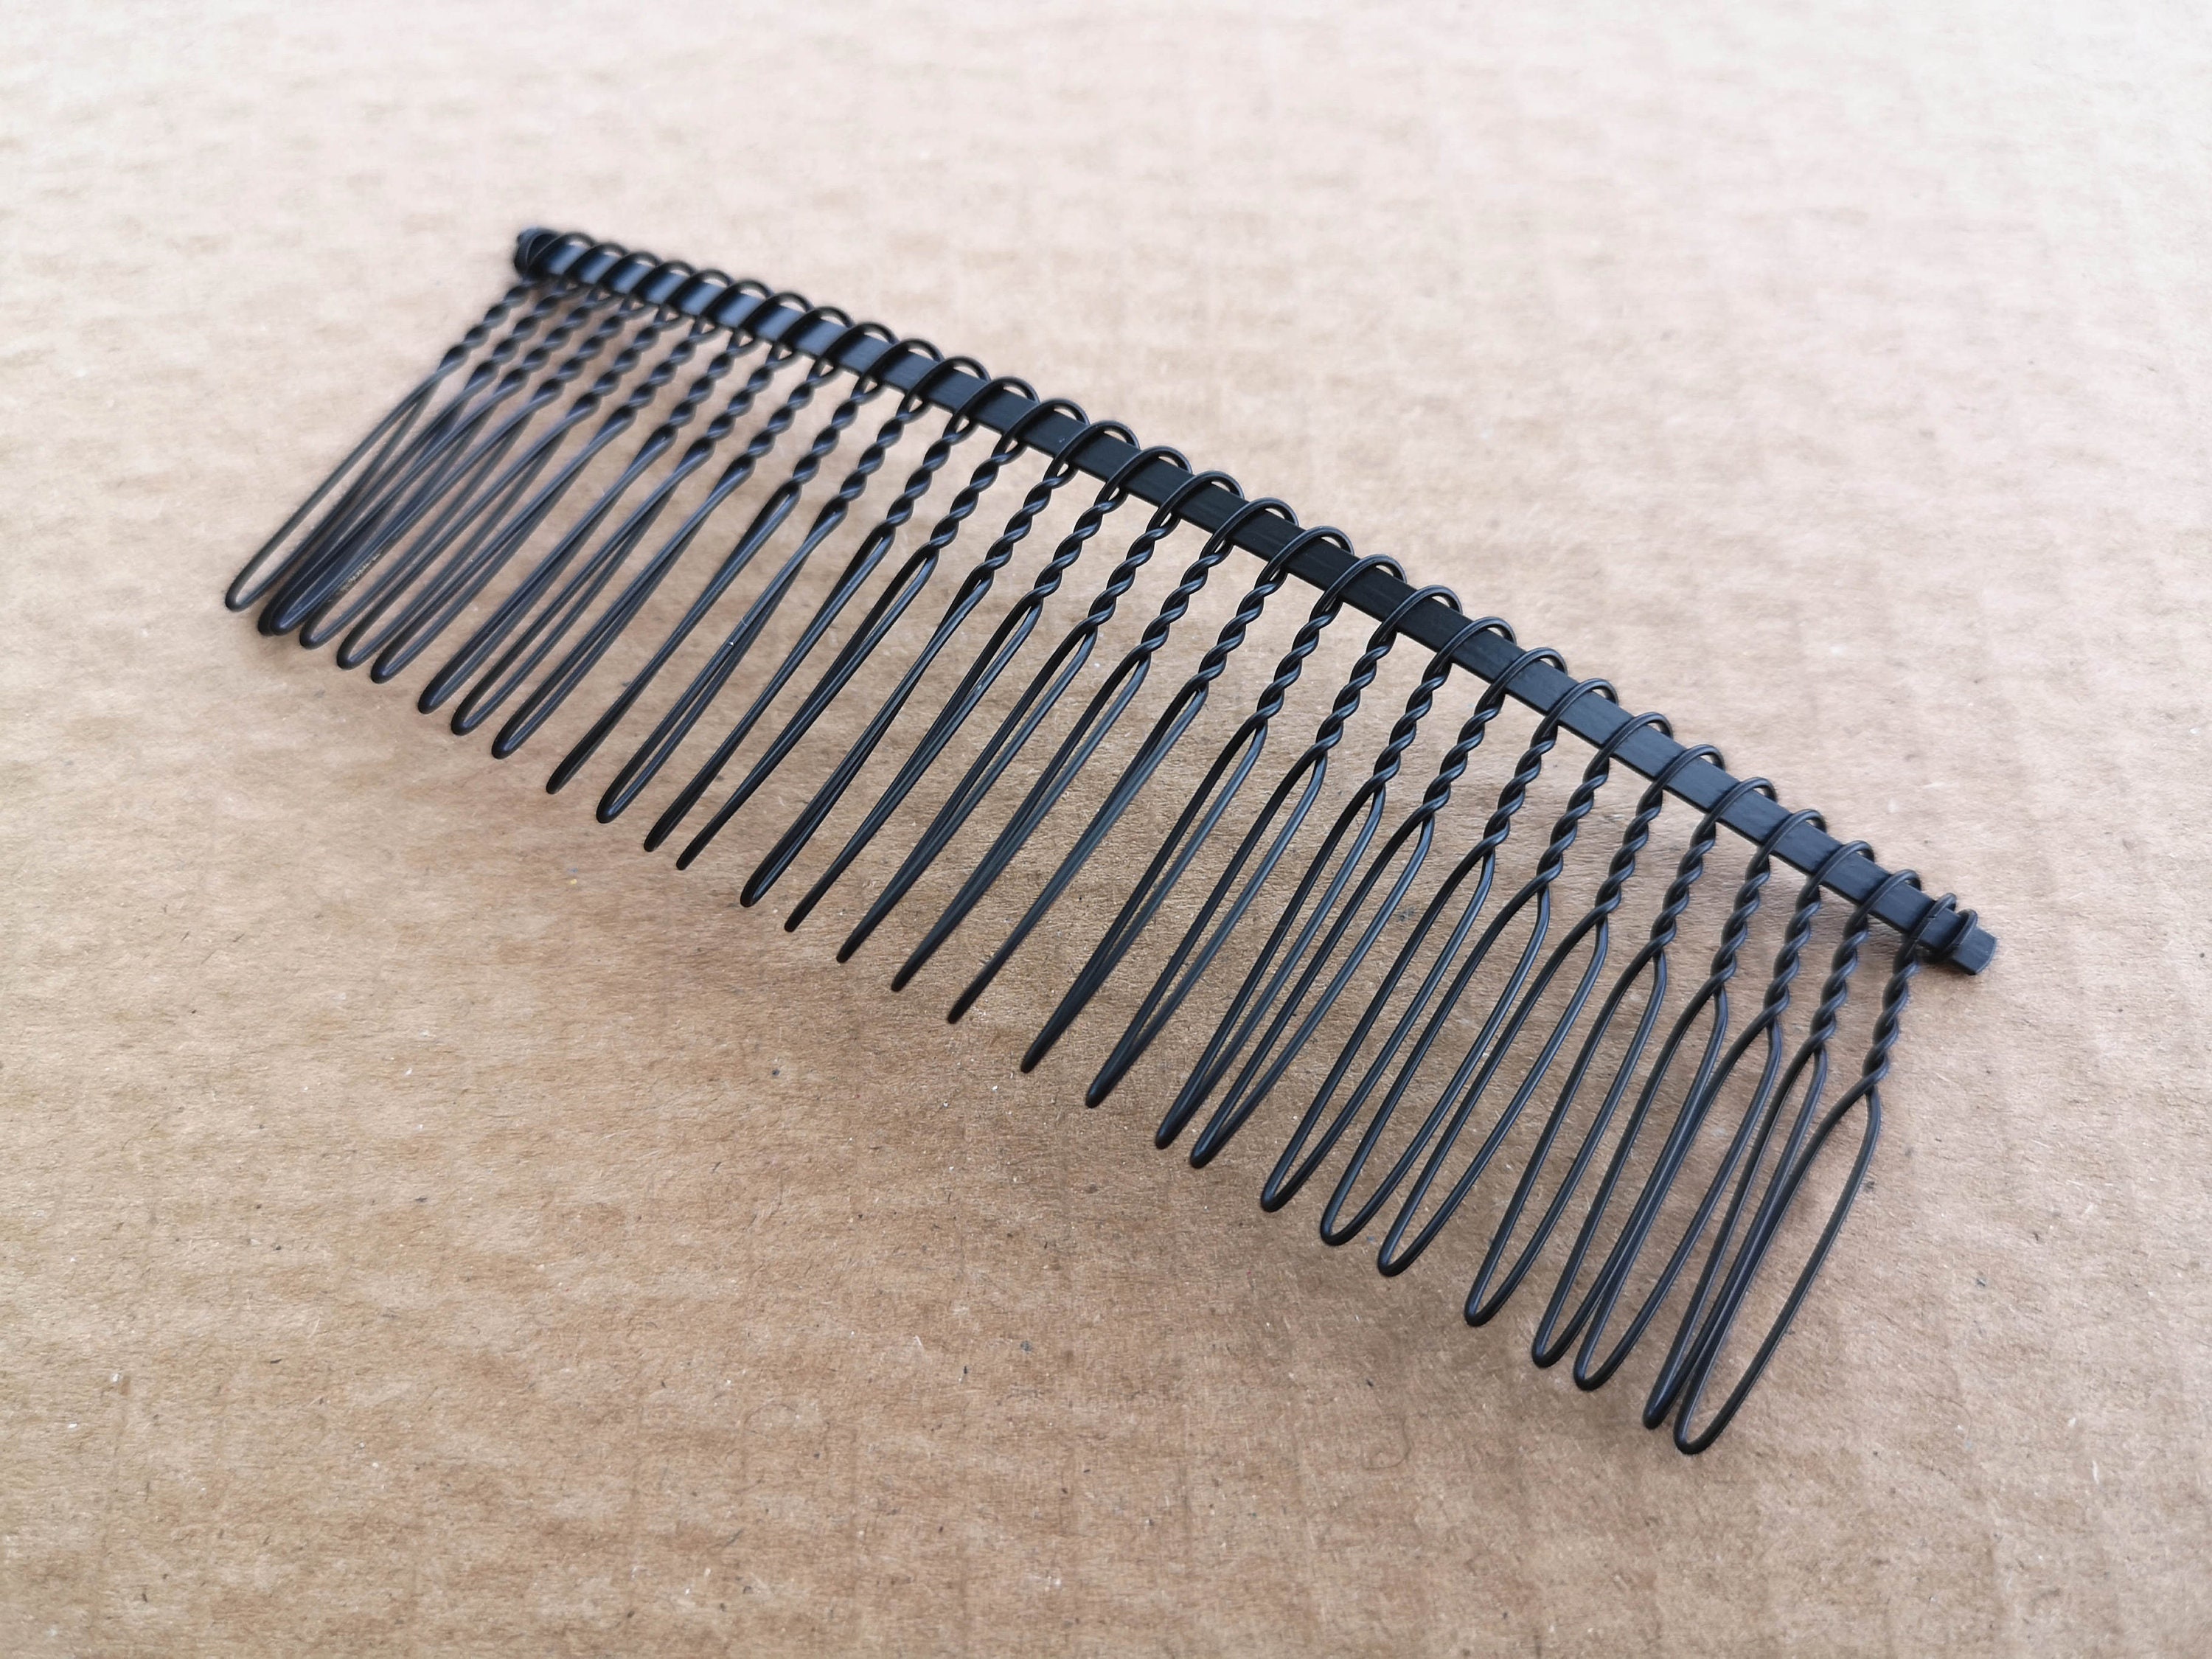 6 safe wrapped Wig combs to secure your wigs